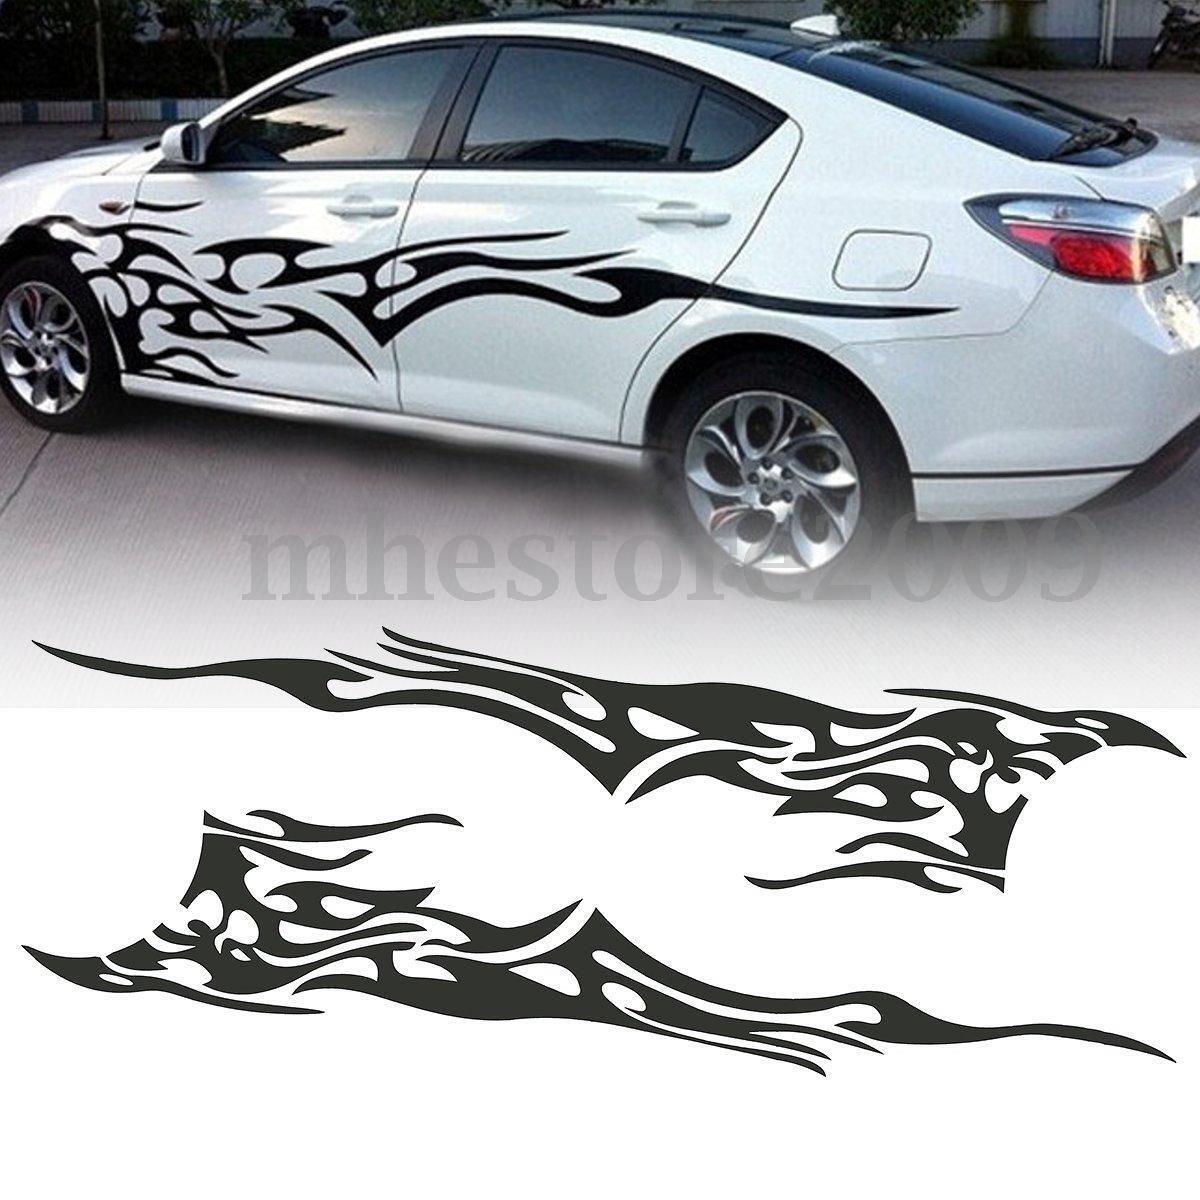 83'' X 19'' Car Decal Vinyl Graphics Two Side Stickers Body Decals Sticker Black